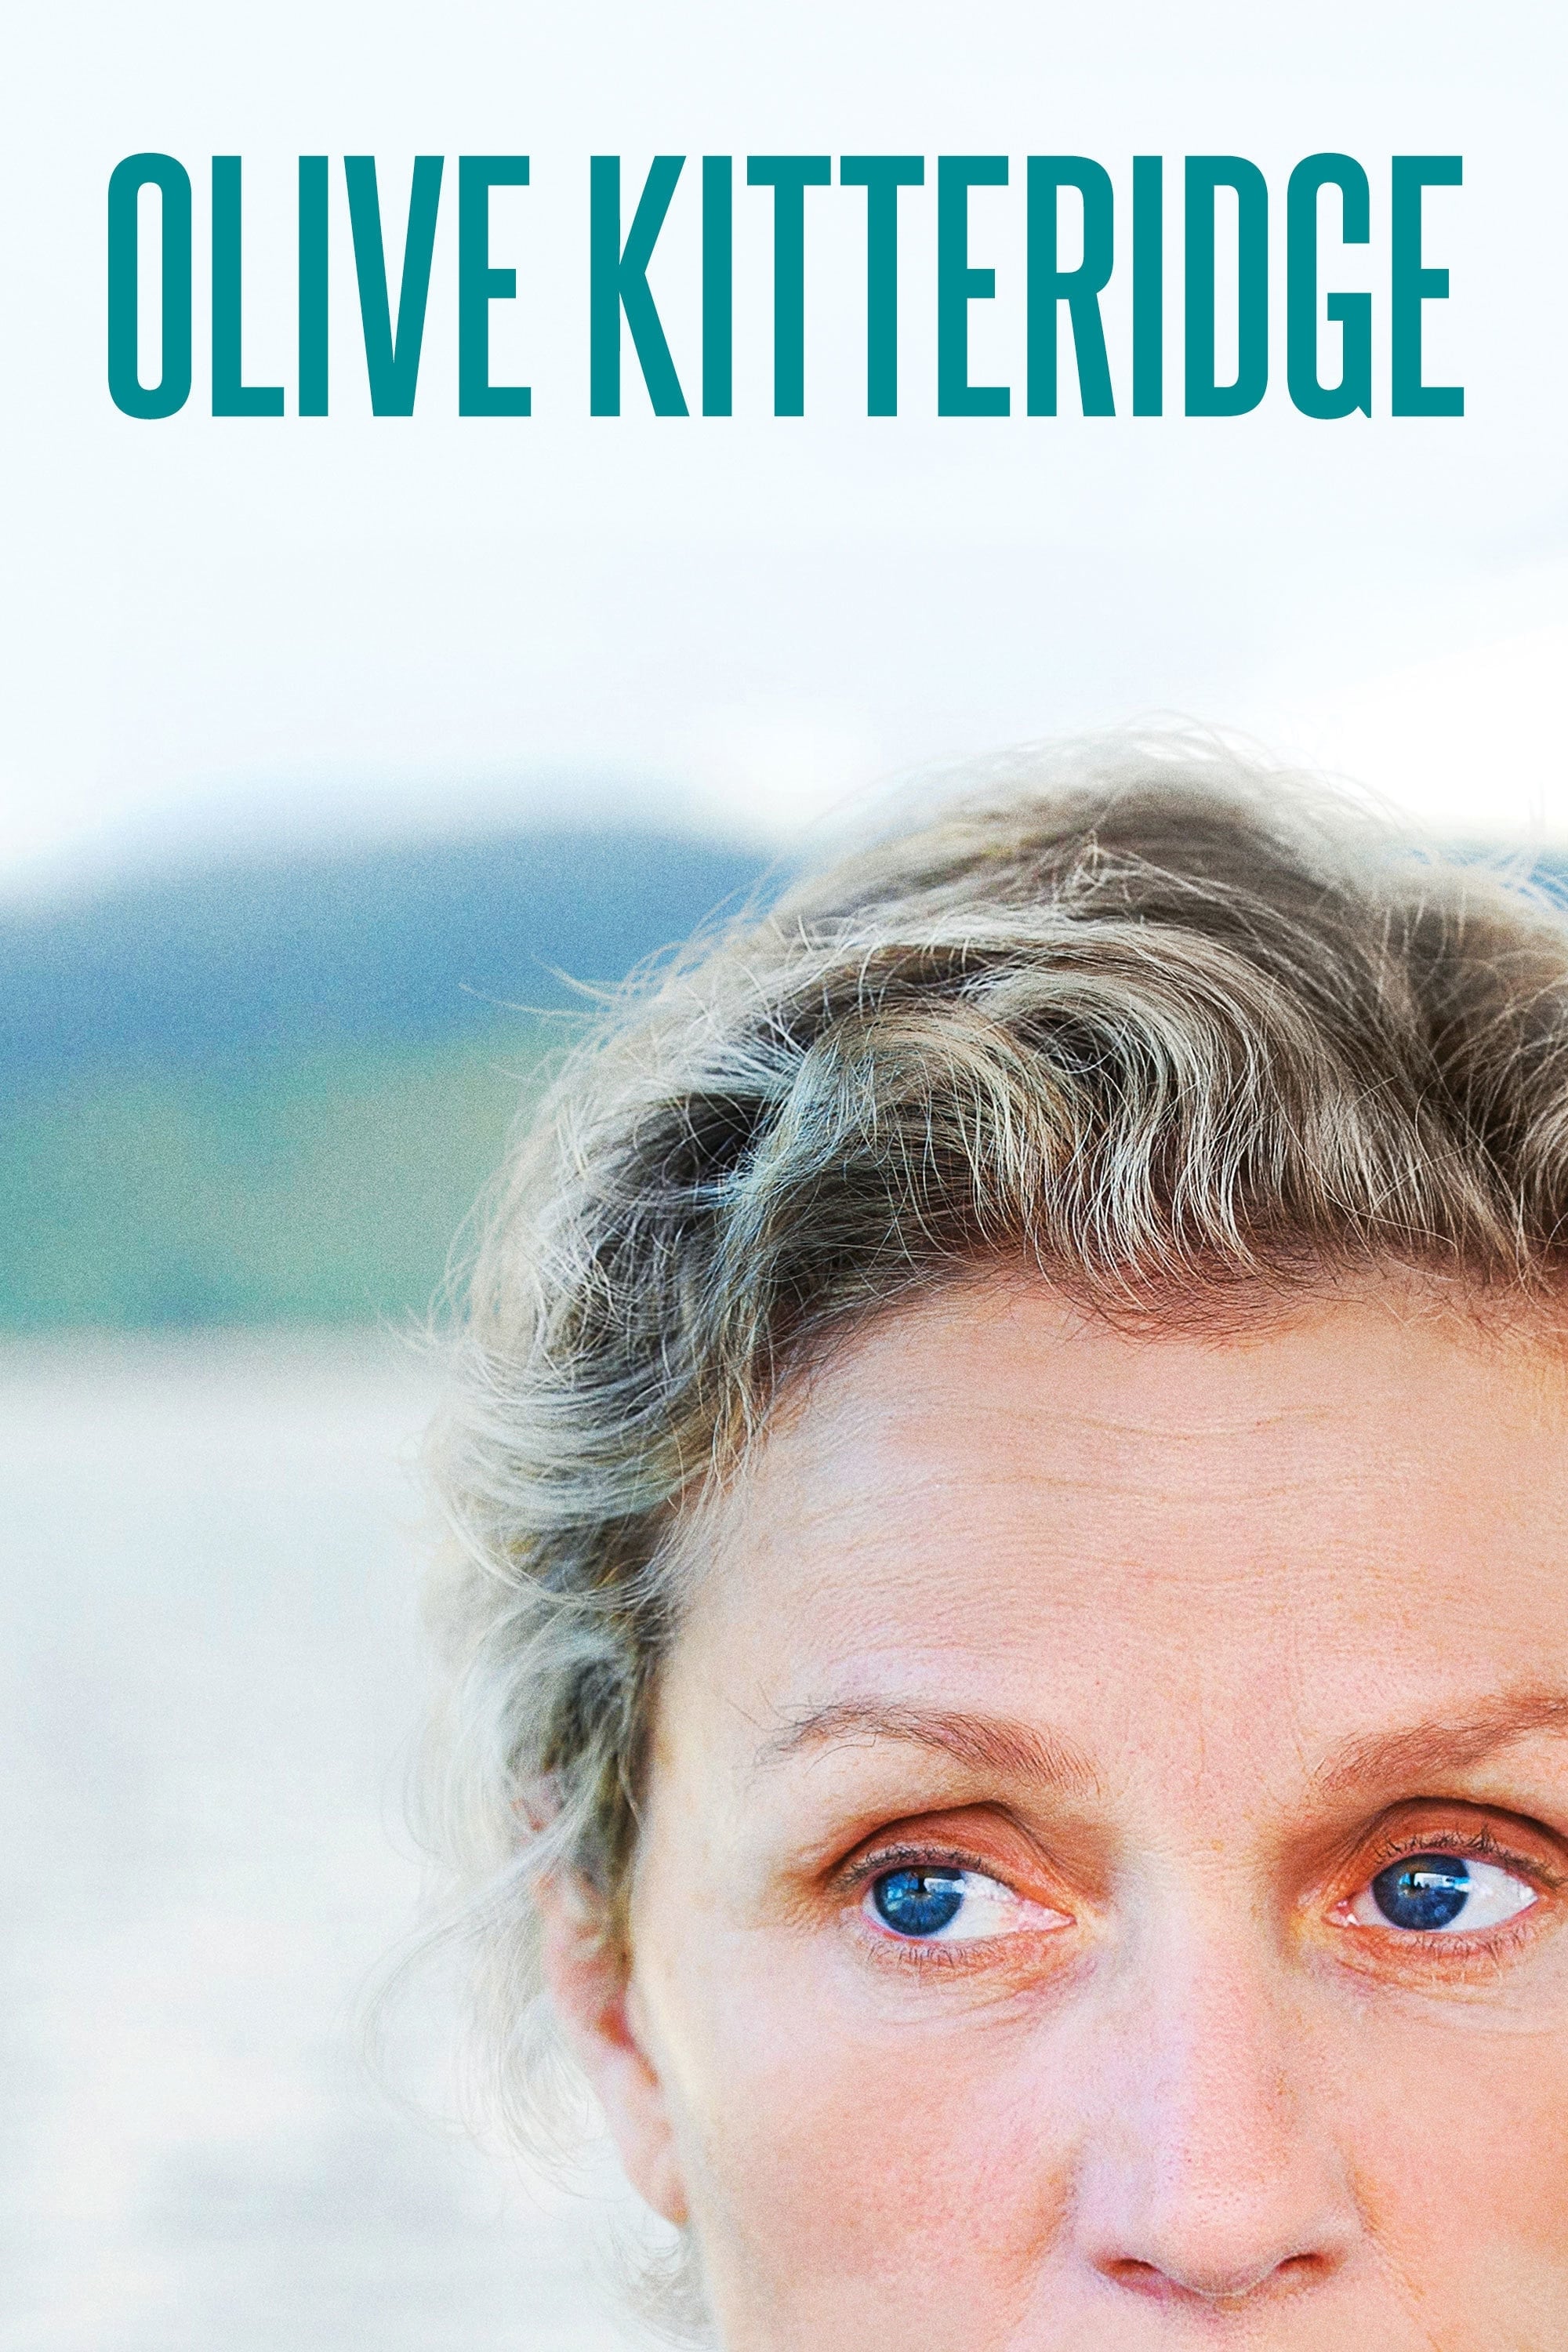 Olive Kitteridge TV Shows About Woman Director